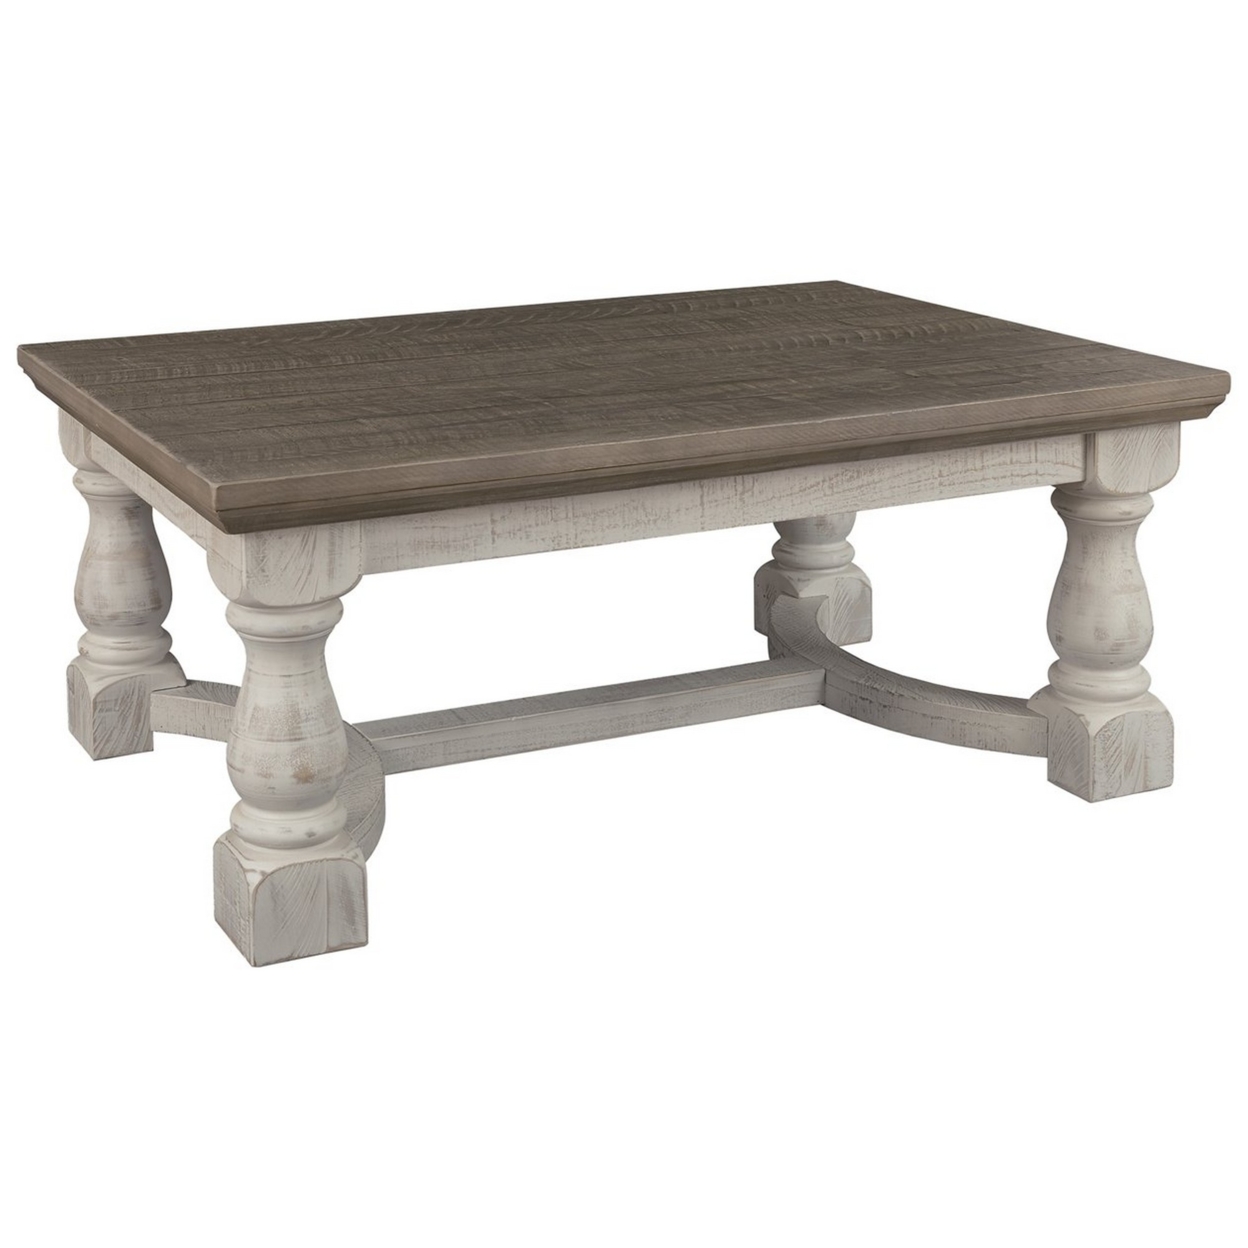 Rectangular Wooden Cocktail Table With Trestle Base,Brown And Antique White- Saltoro Sherpi